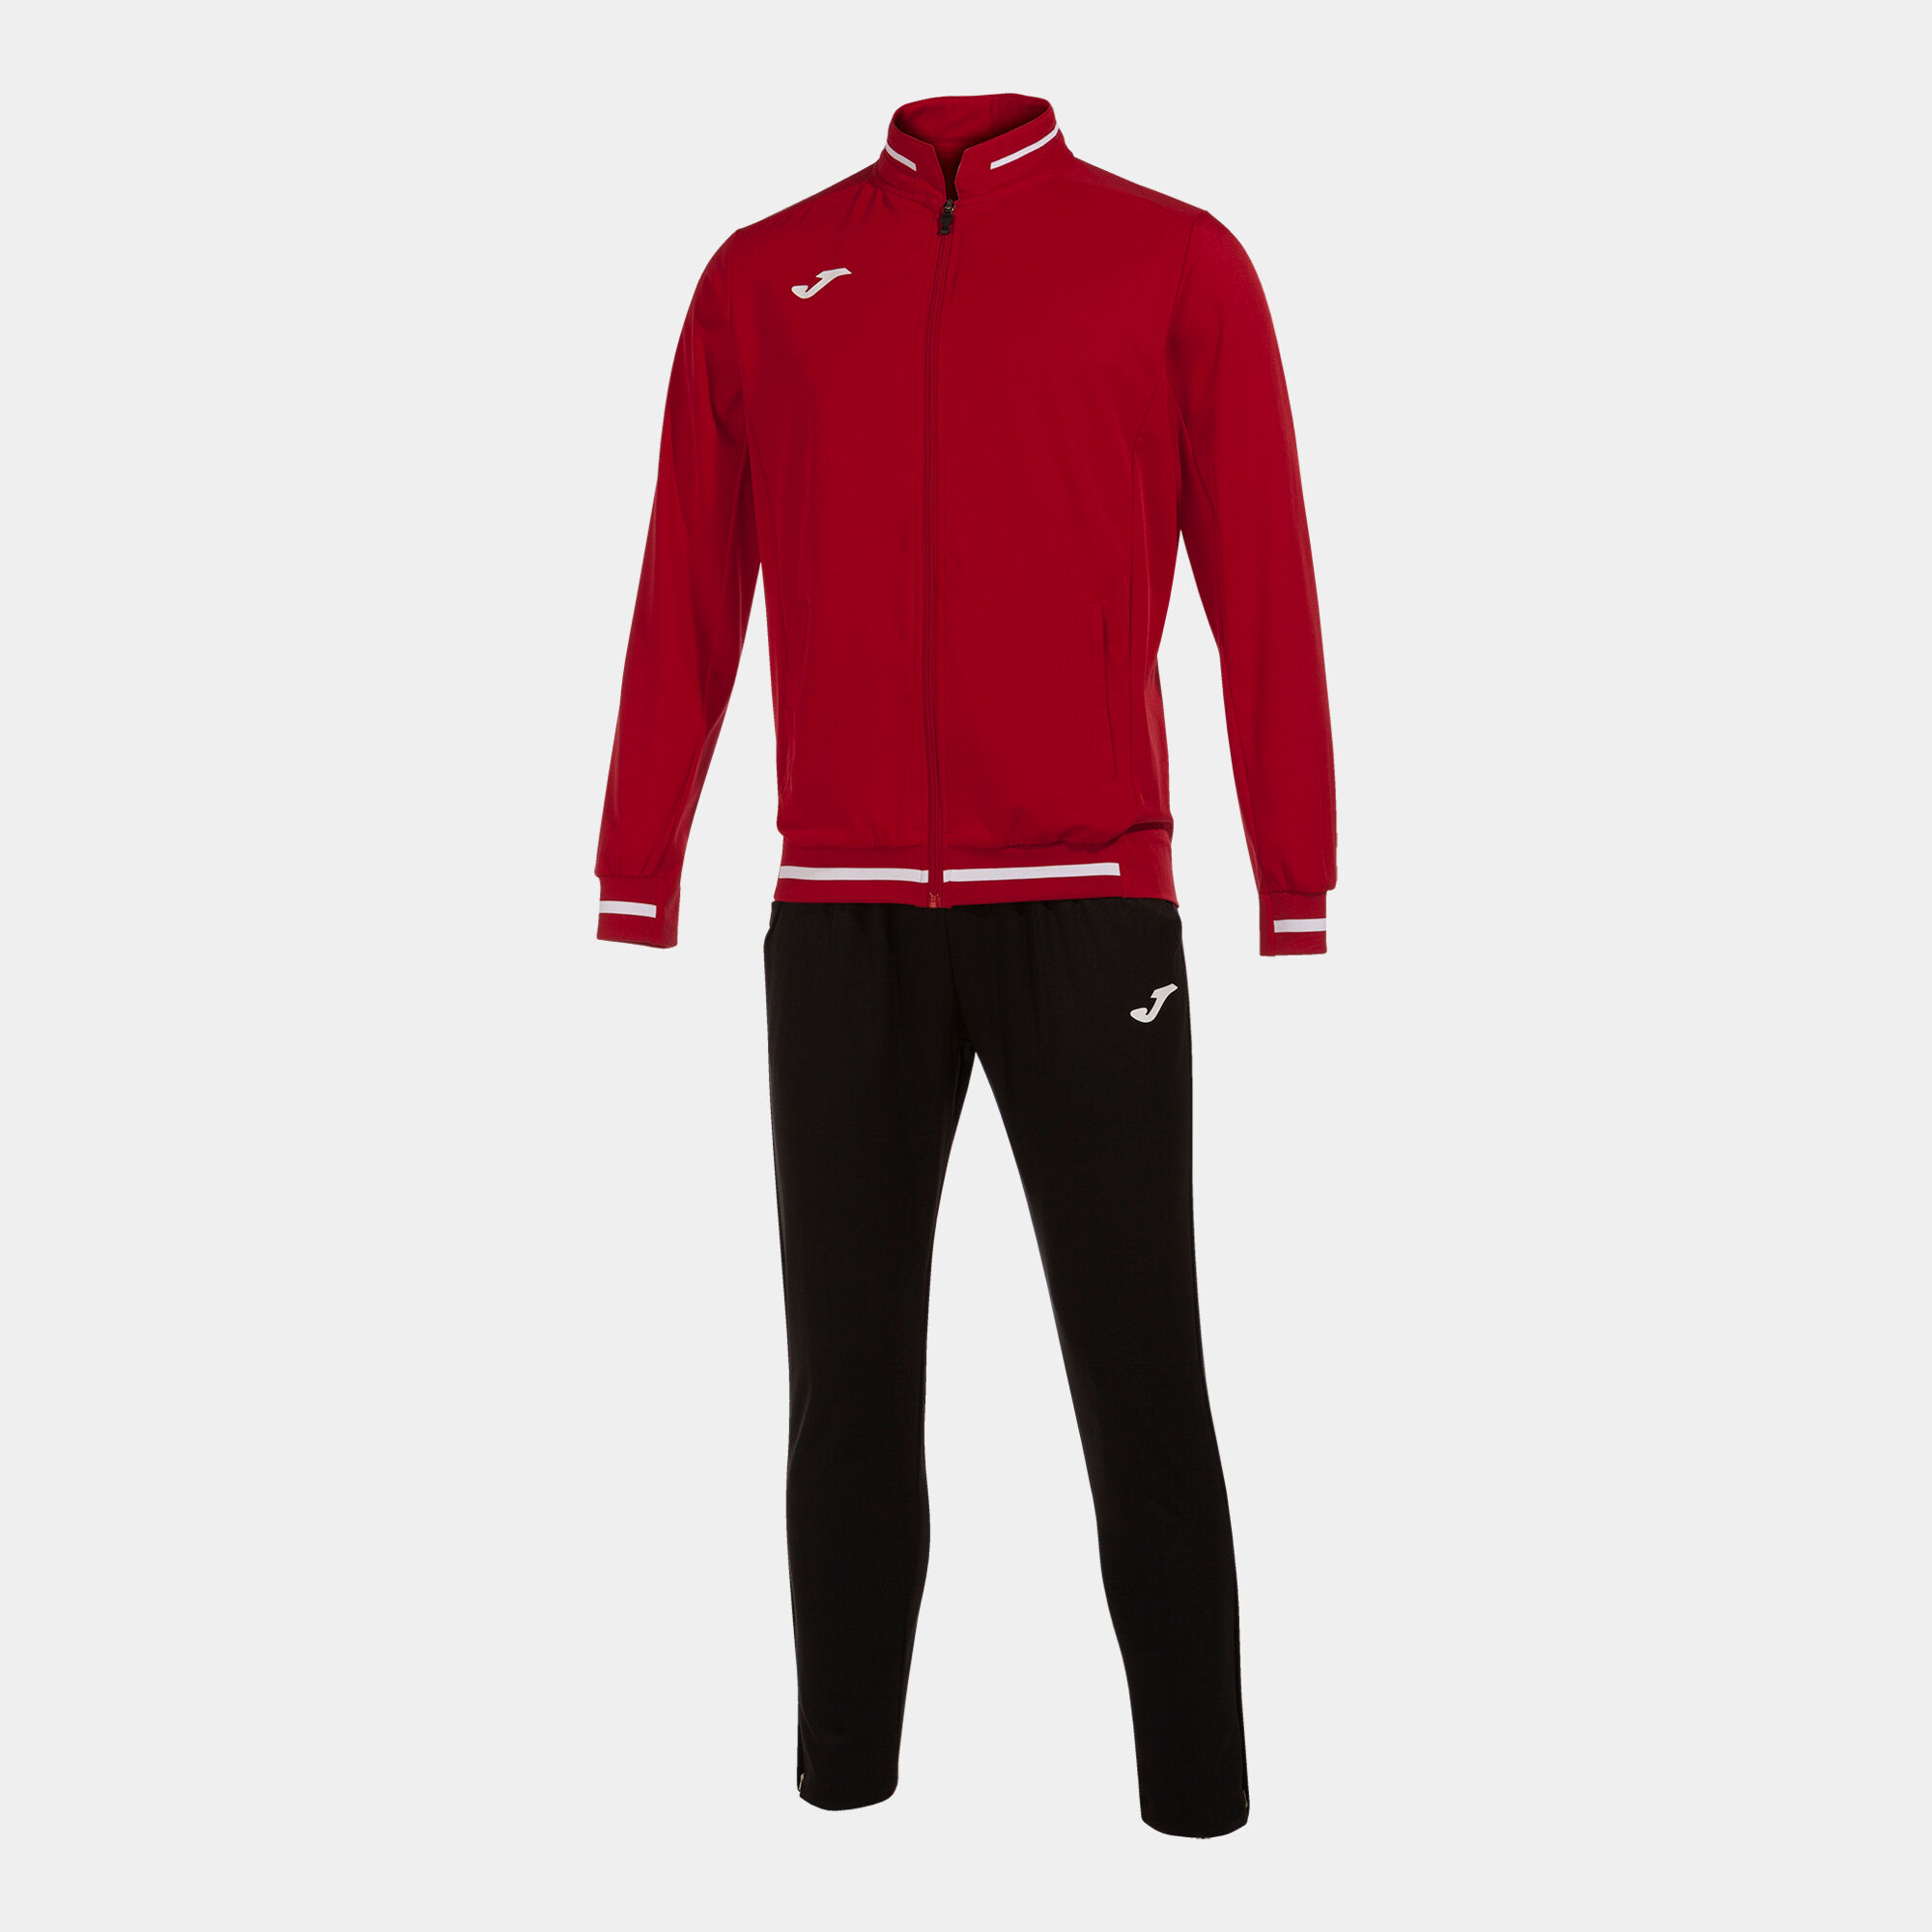 Tracksuit man Montreal red black